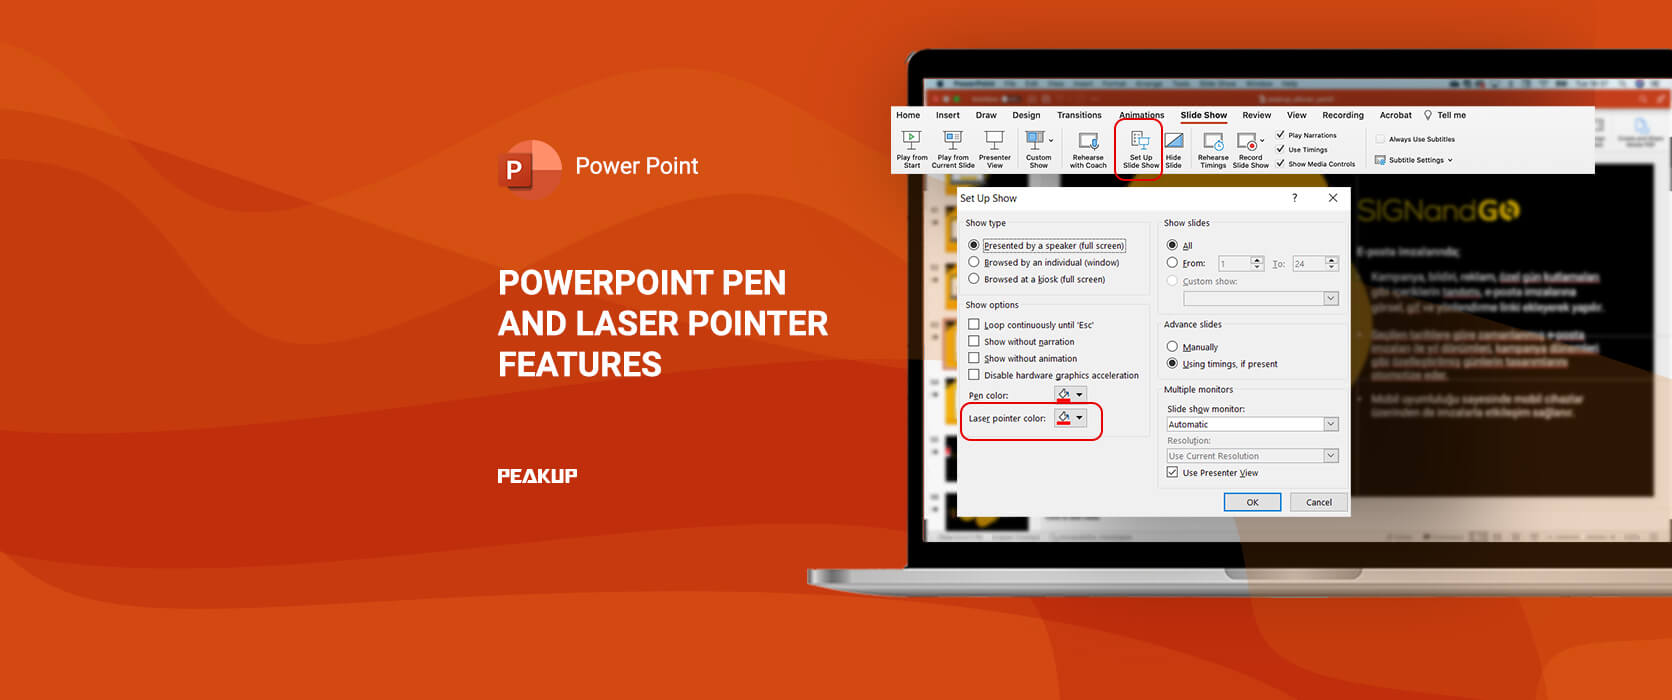 Turn your mouse into a laser pointer - Microsoft Support